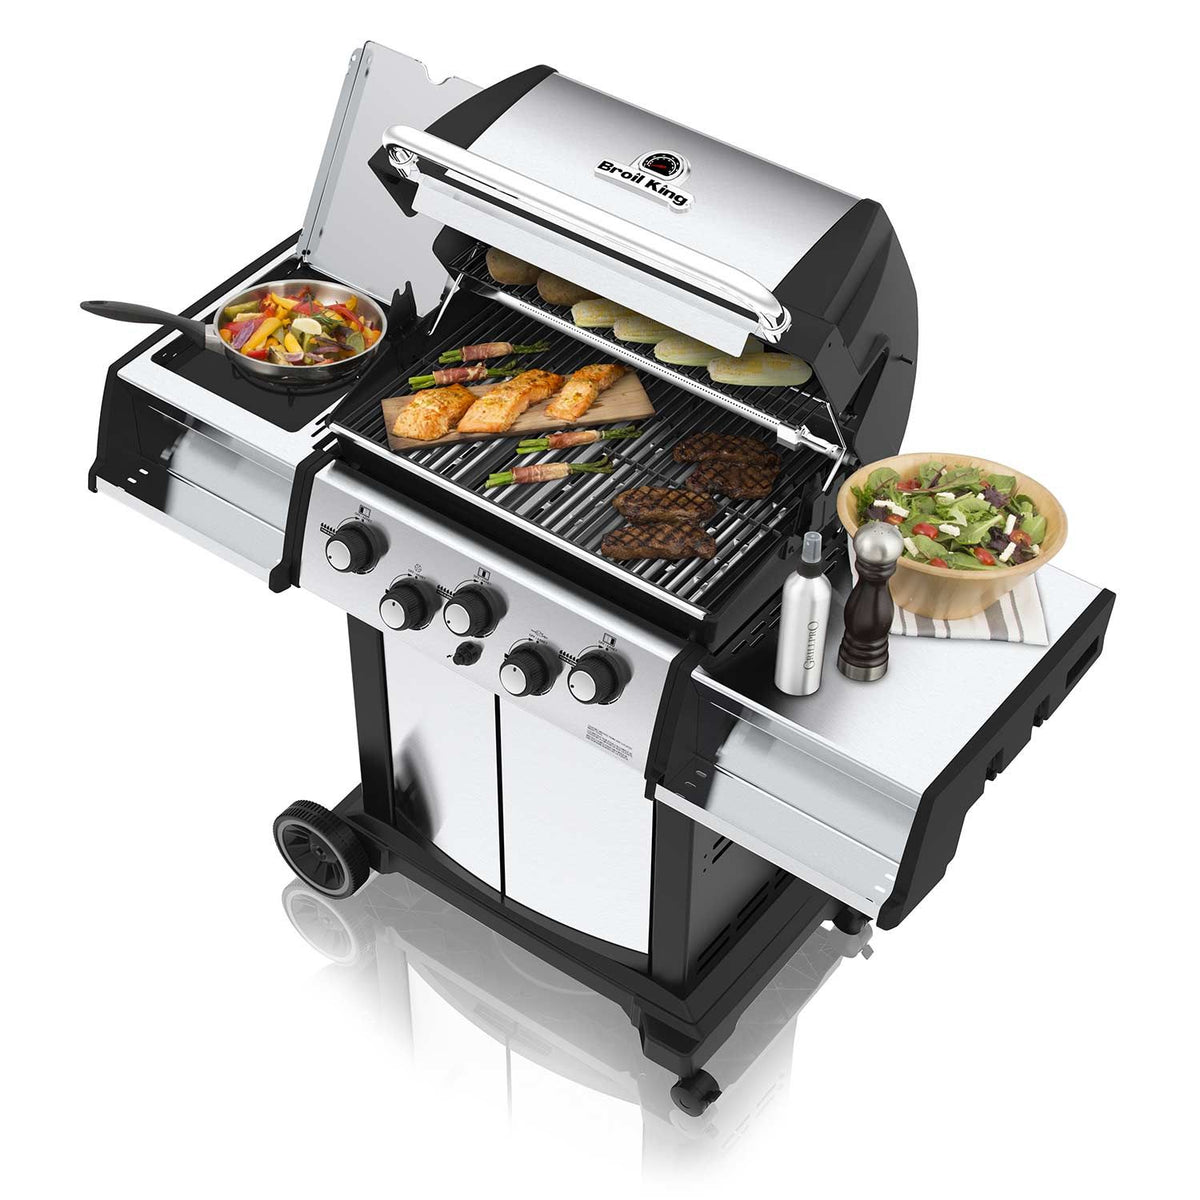 Broil King Signet 390 Gas Grill Angled View Open Lid